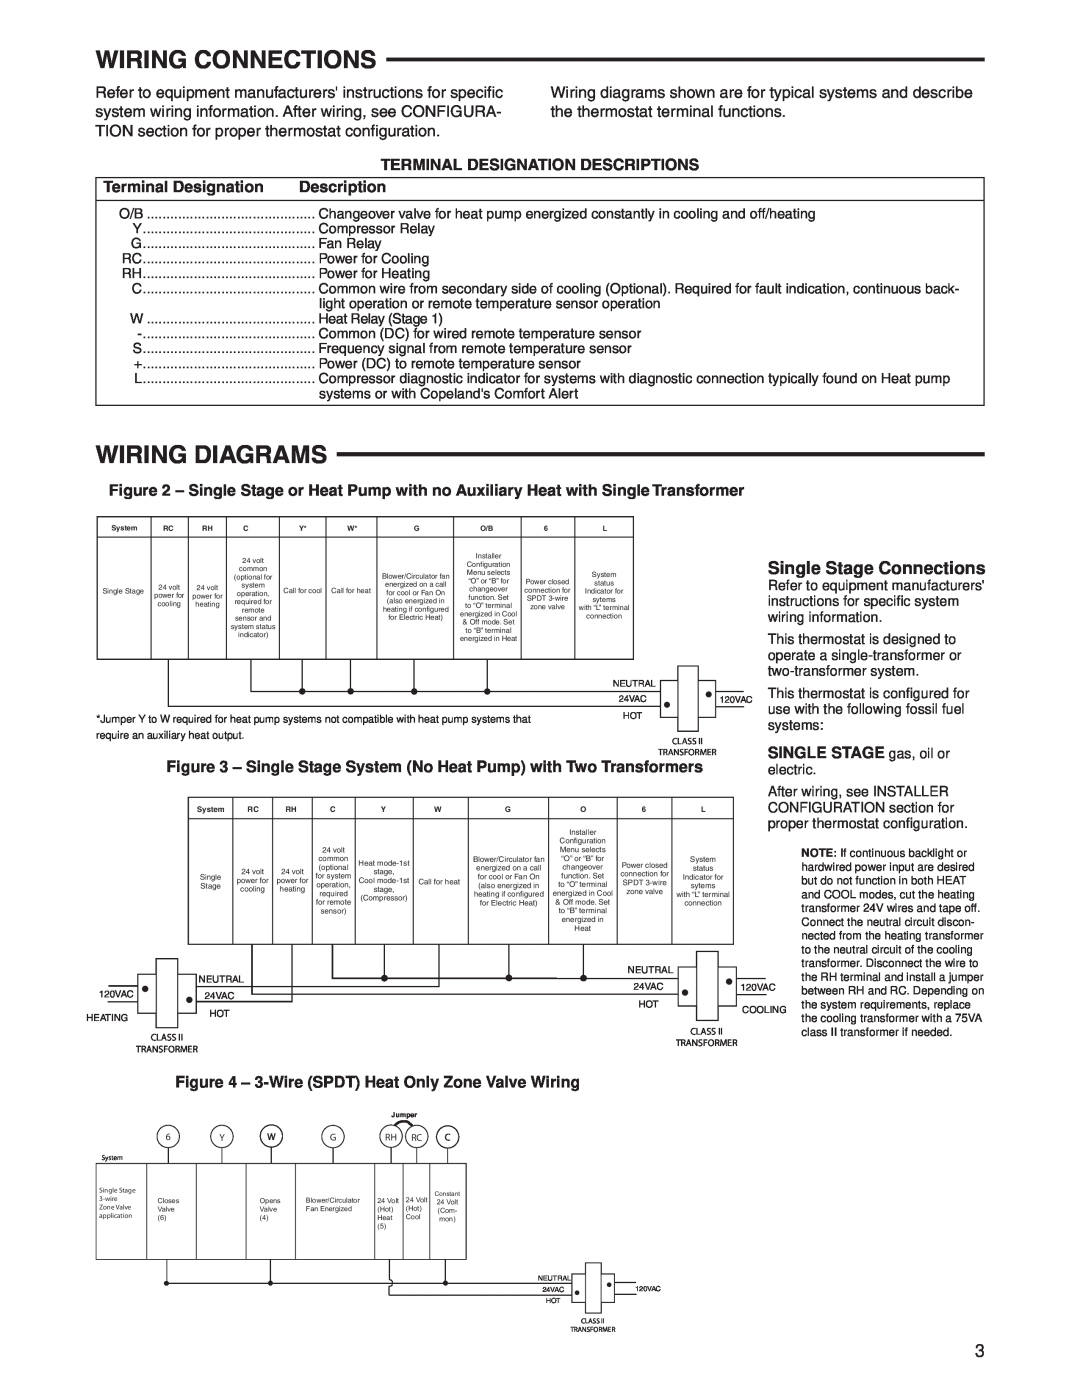 White Rodgers 1F97-0671 specifications Wiring Connections, Wiring Diagrams, Single Stage Connections 